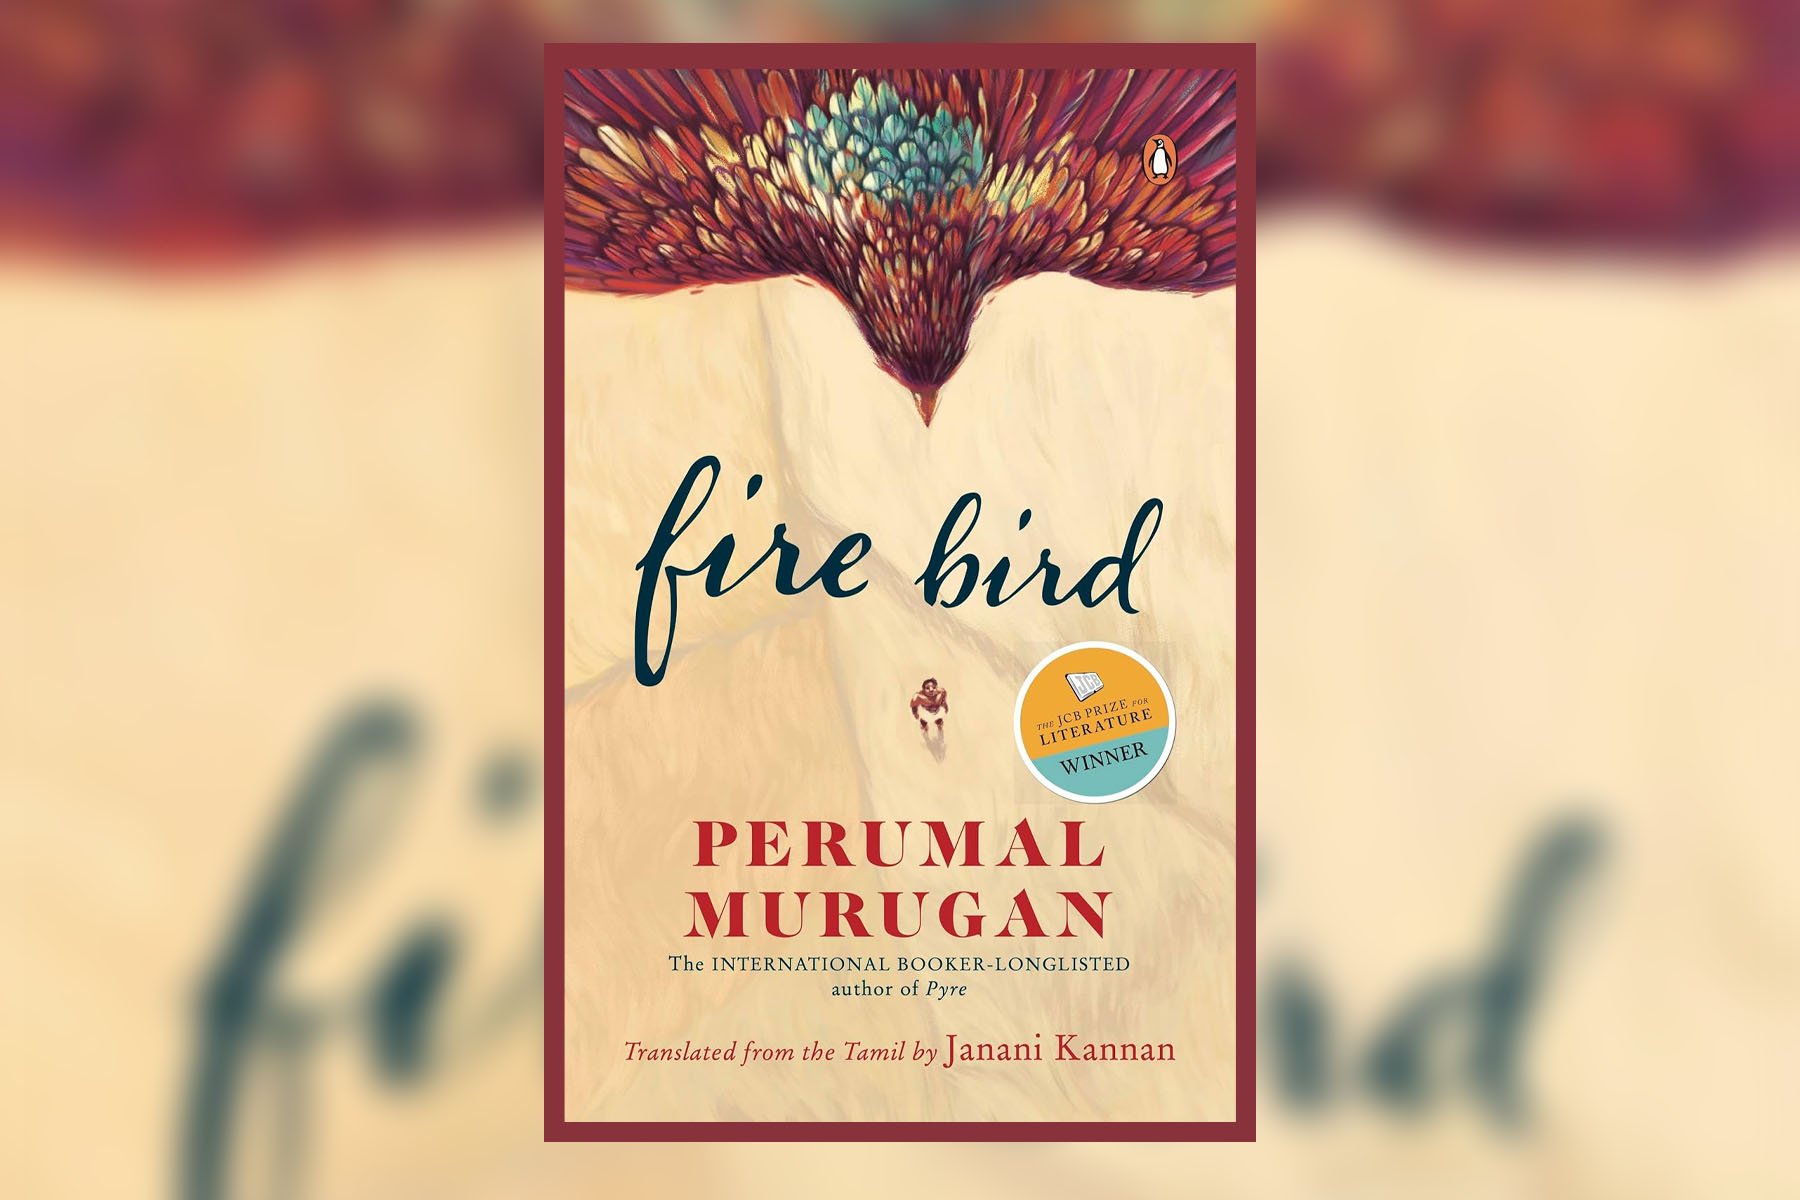 Review: Perumal Murugan’s Fire Bird is a Tale of Man’s Link to His Land and His Search For Identity